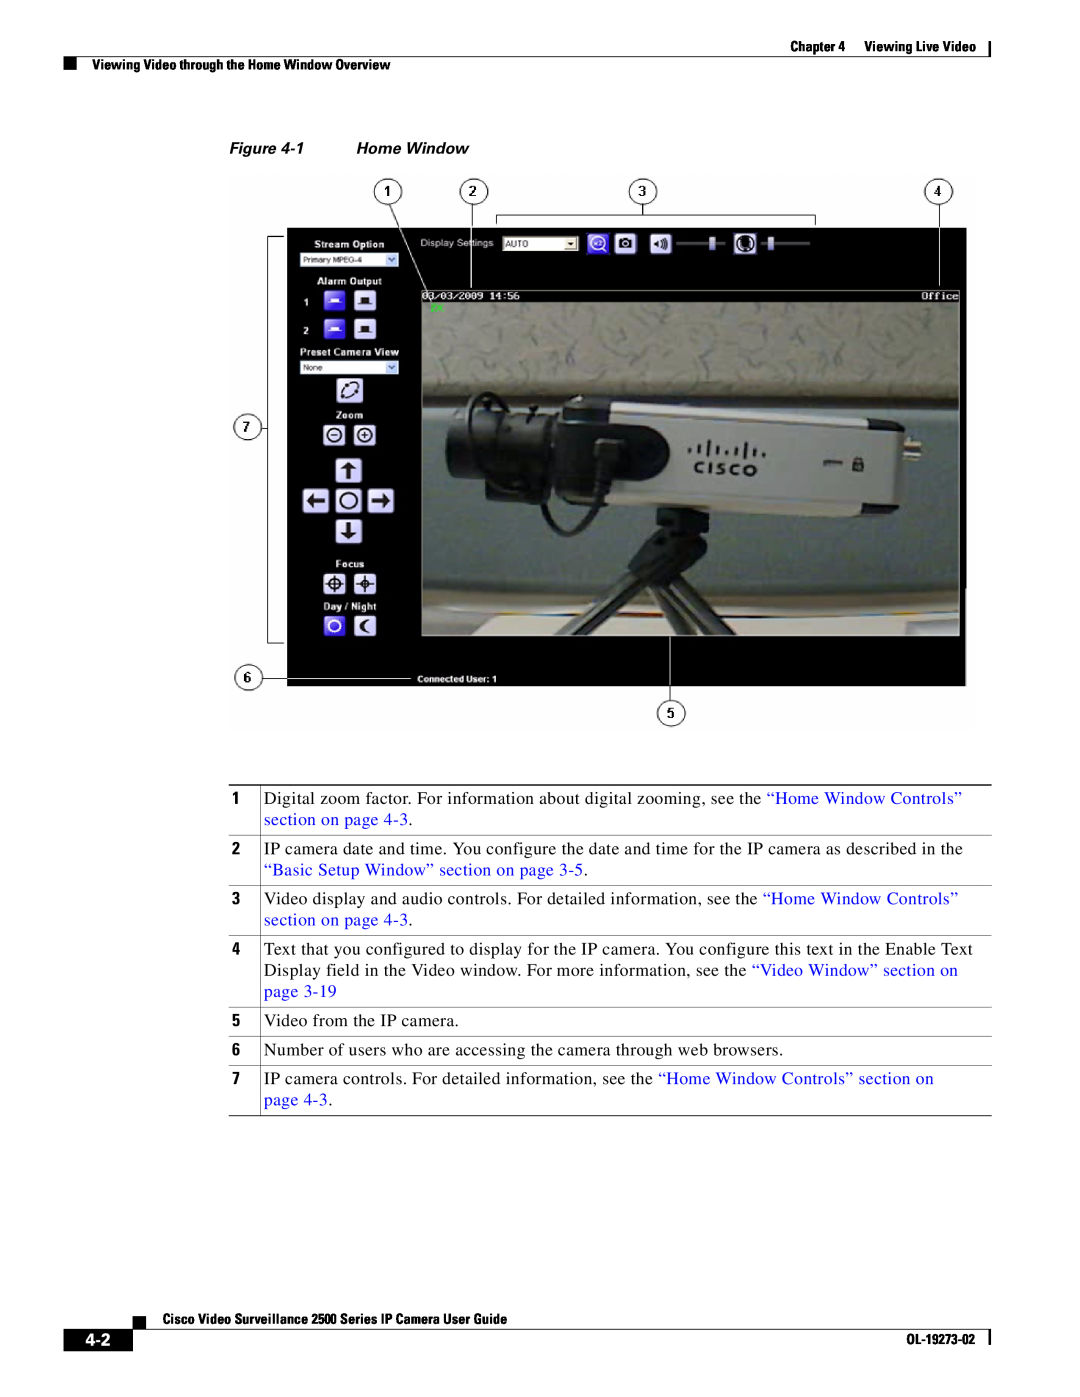 Cisco Systems 2500 Series, CIVS-IPC-2500 manual Video from the IP camera 